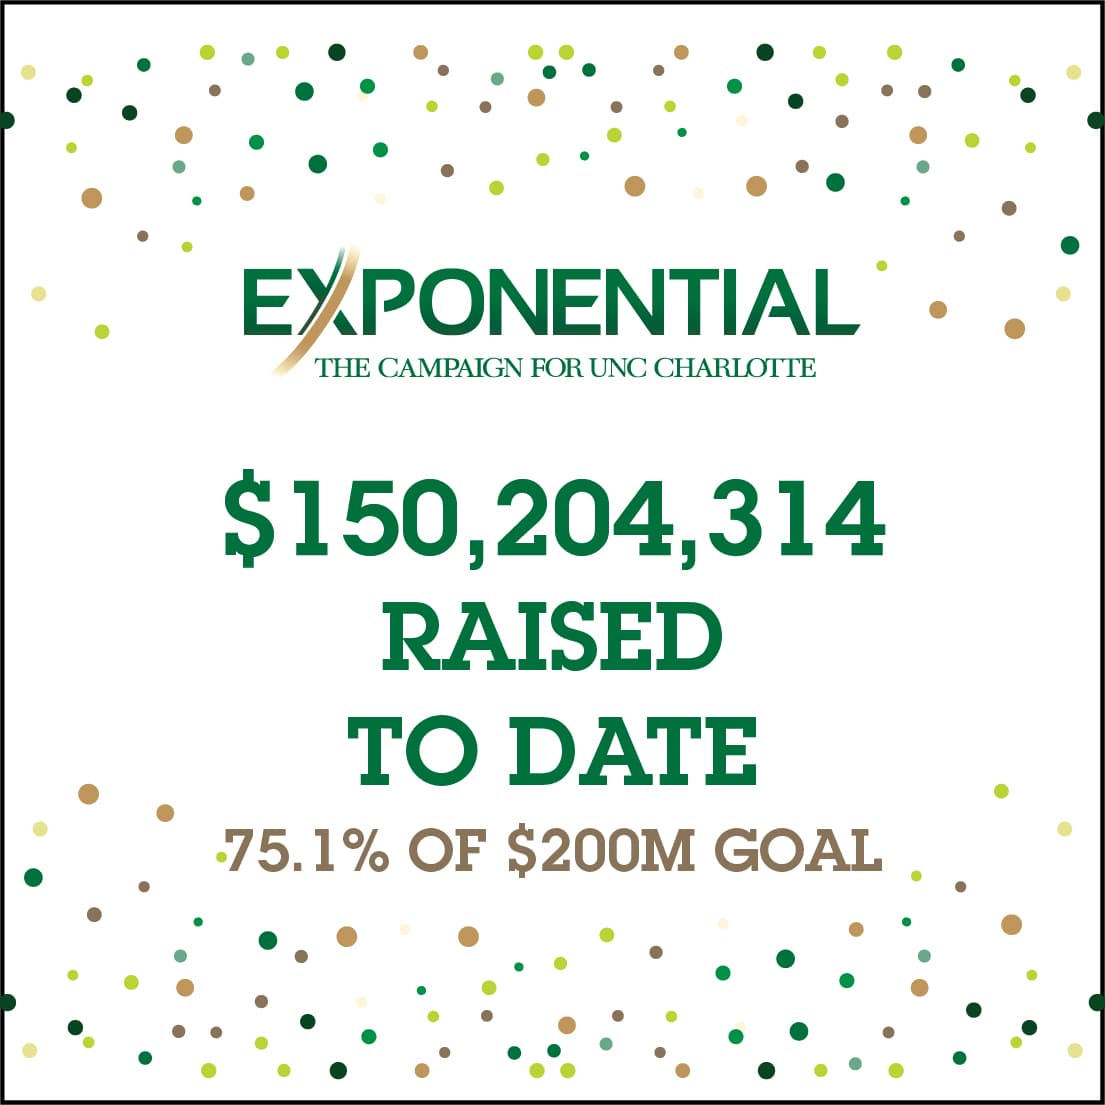 Exponential: $150,204,314 raised to date